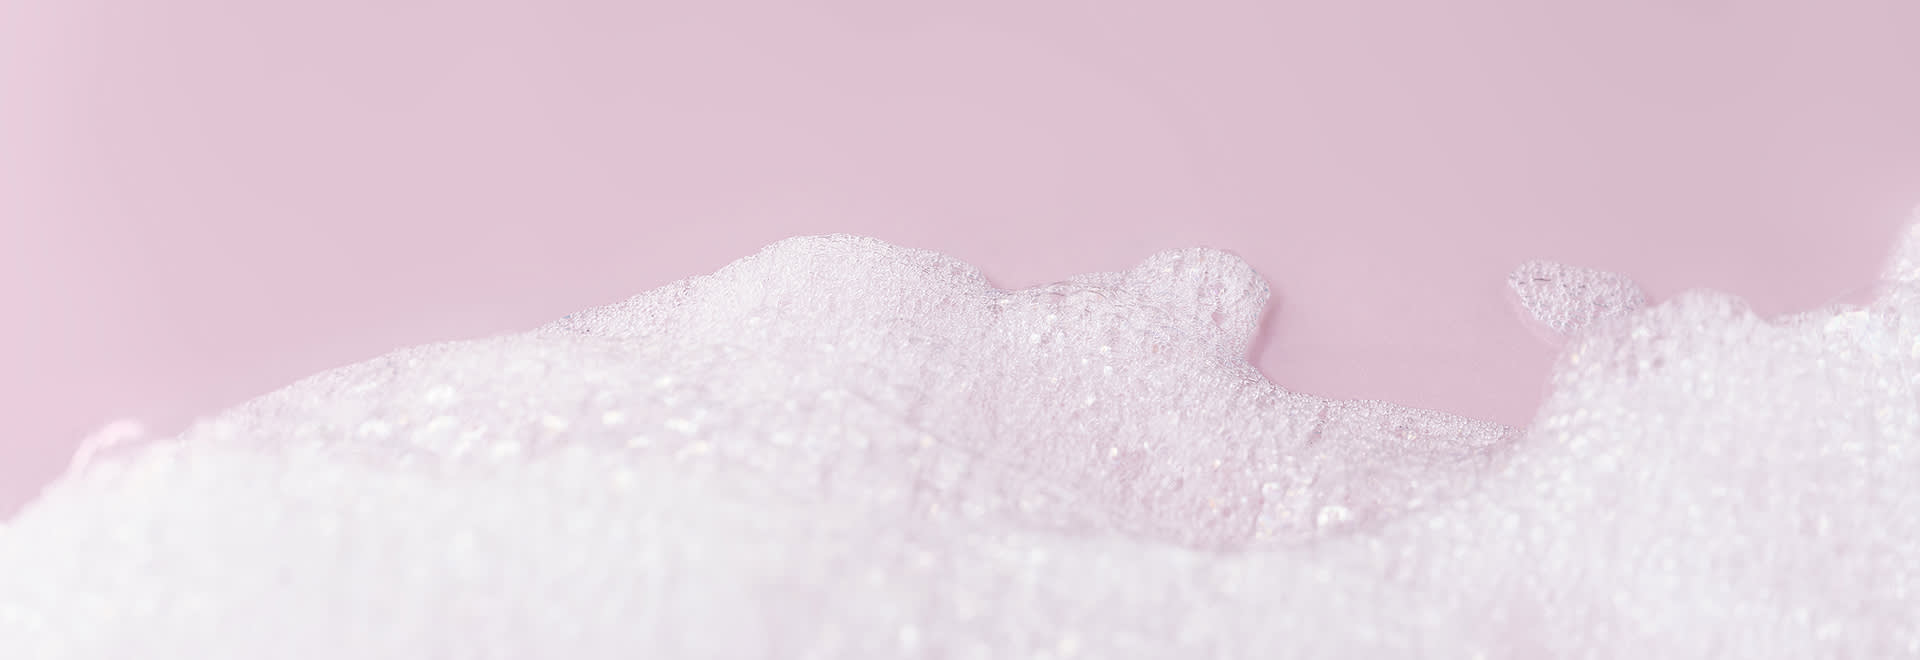 A picture of a foam on pink surface